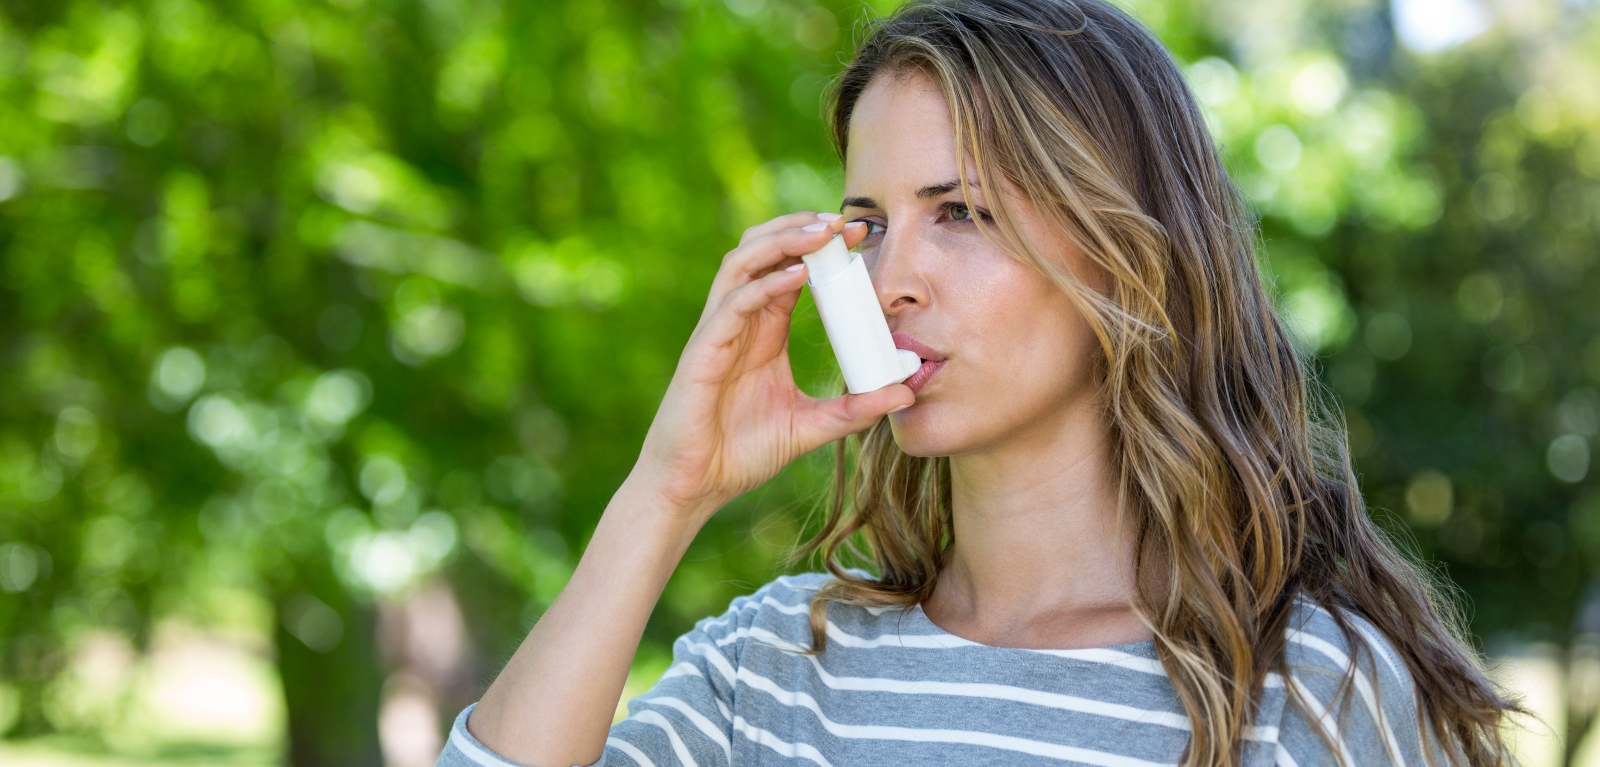 stock image of person using an asthma inhaler